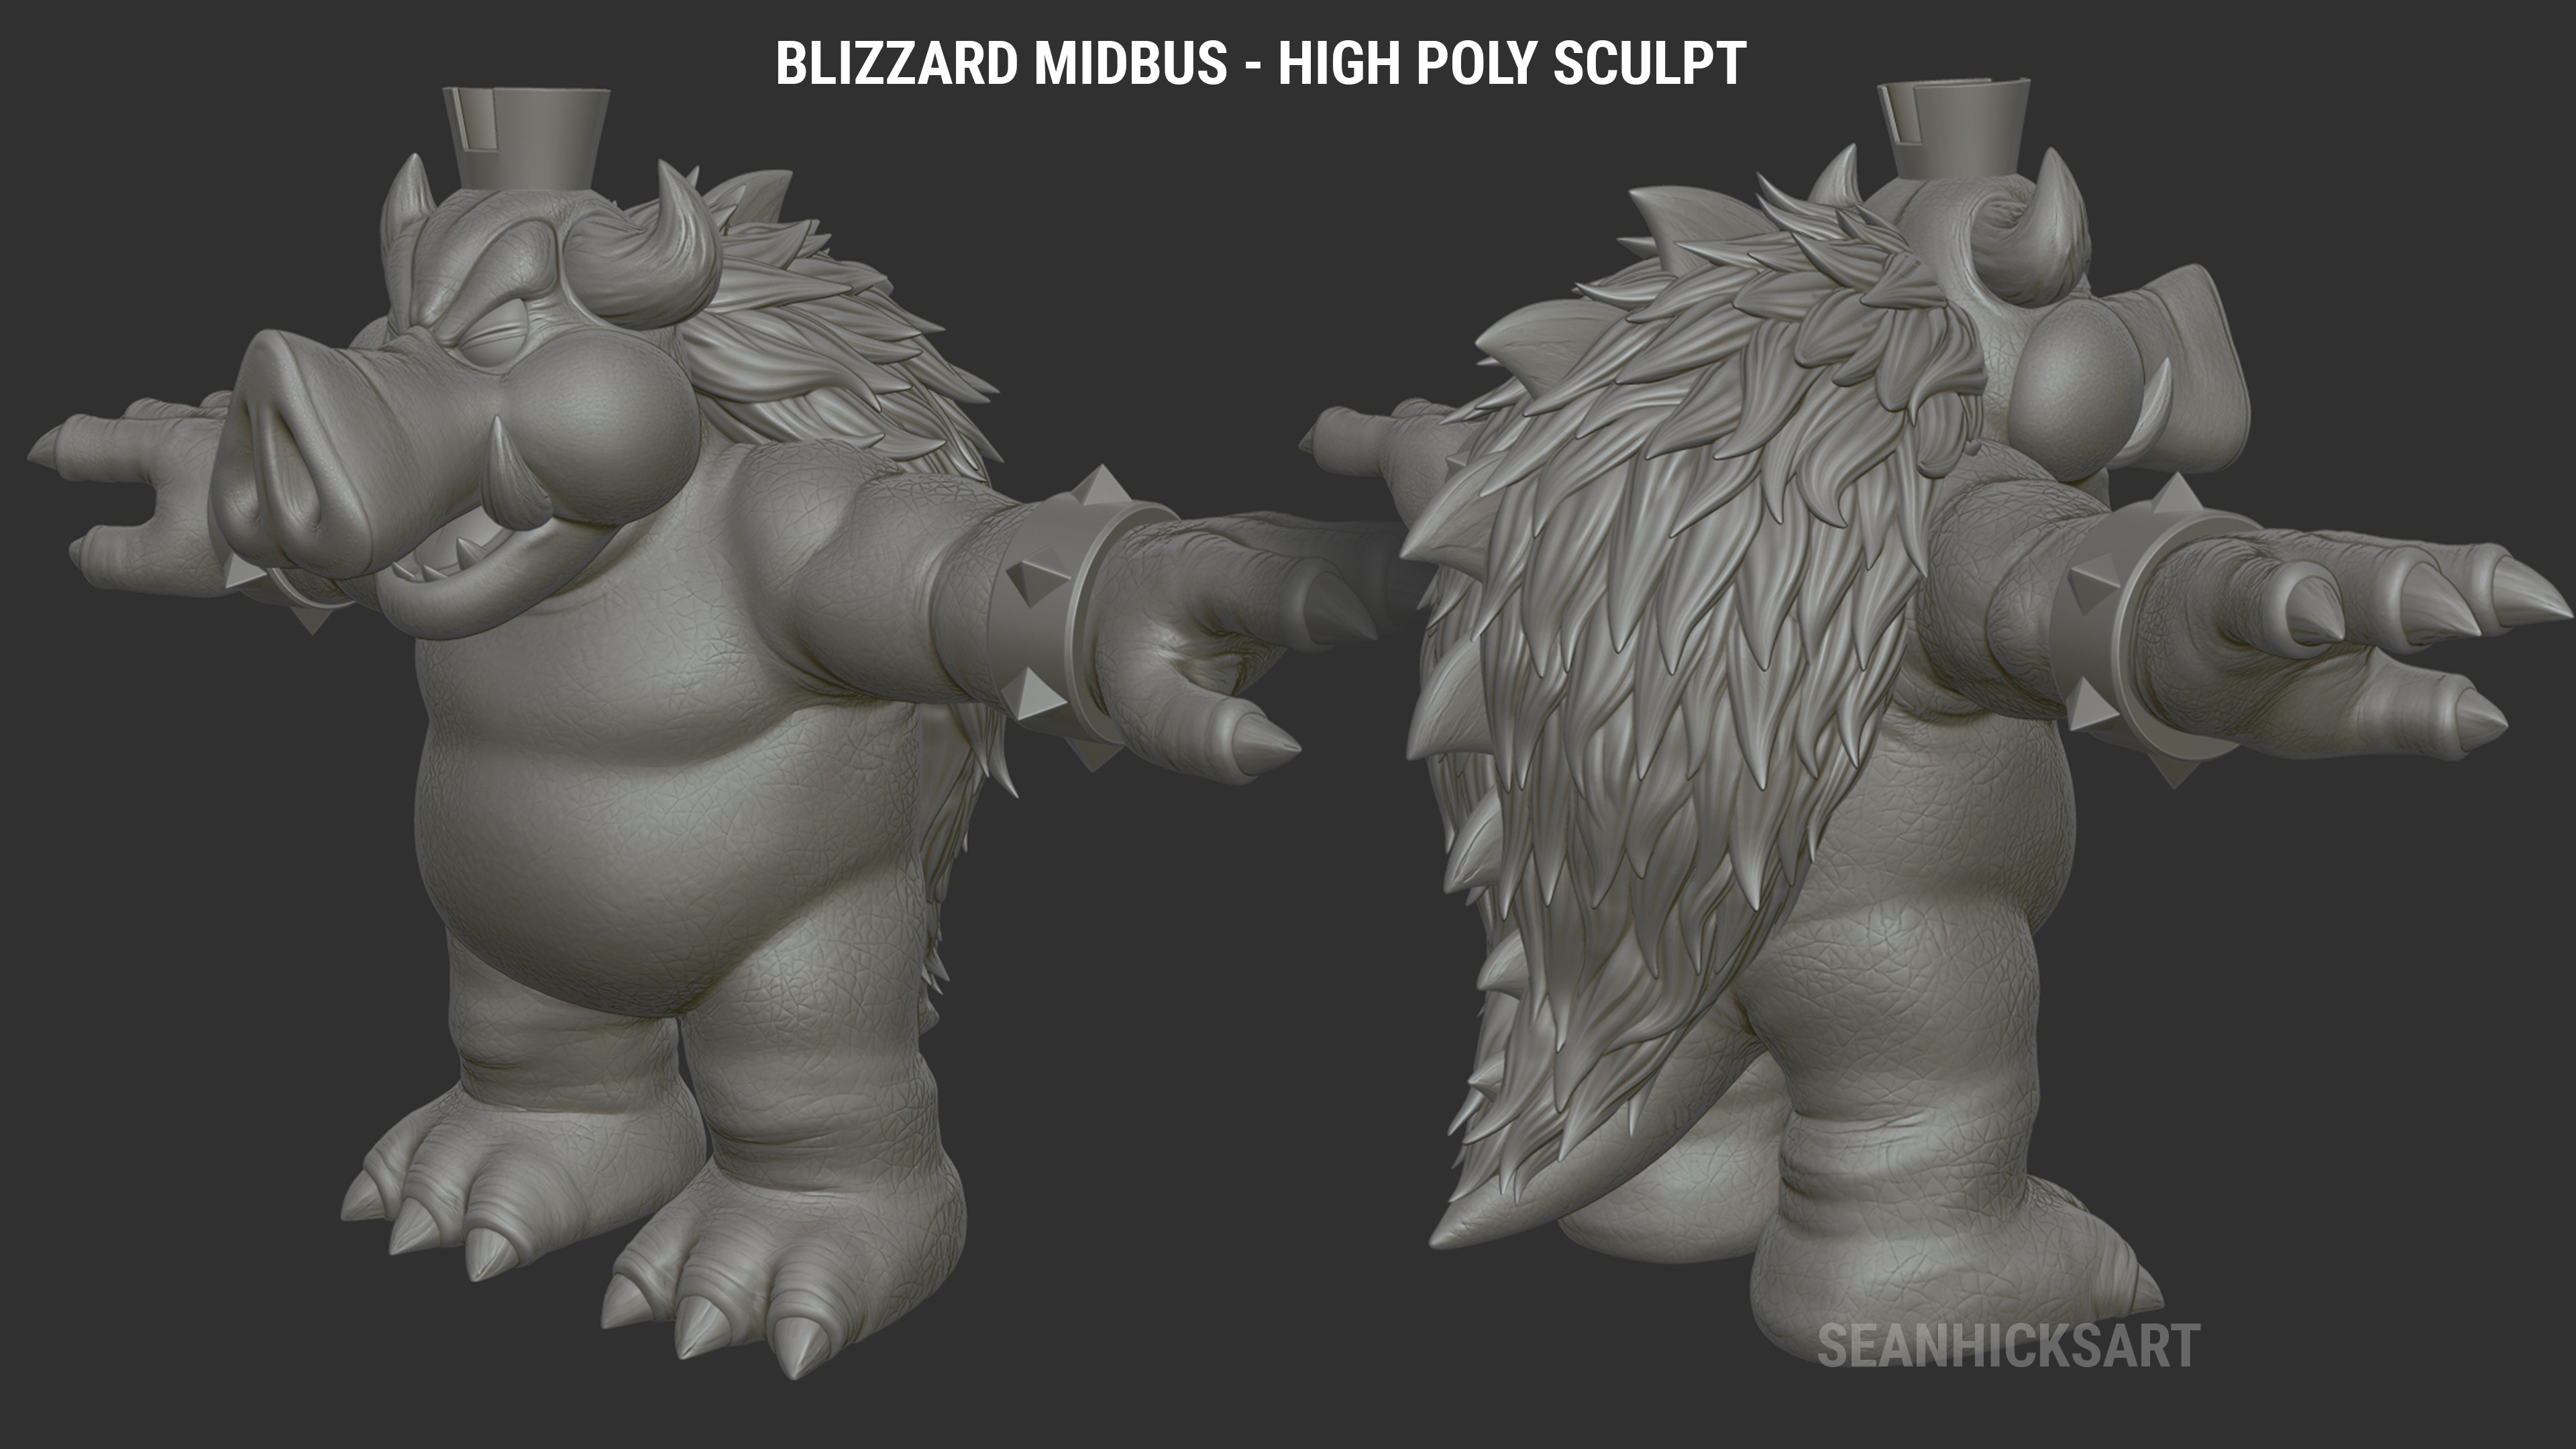 High poly sculpt of Blizzard Midbus in Zbrush